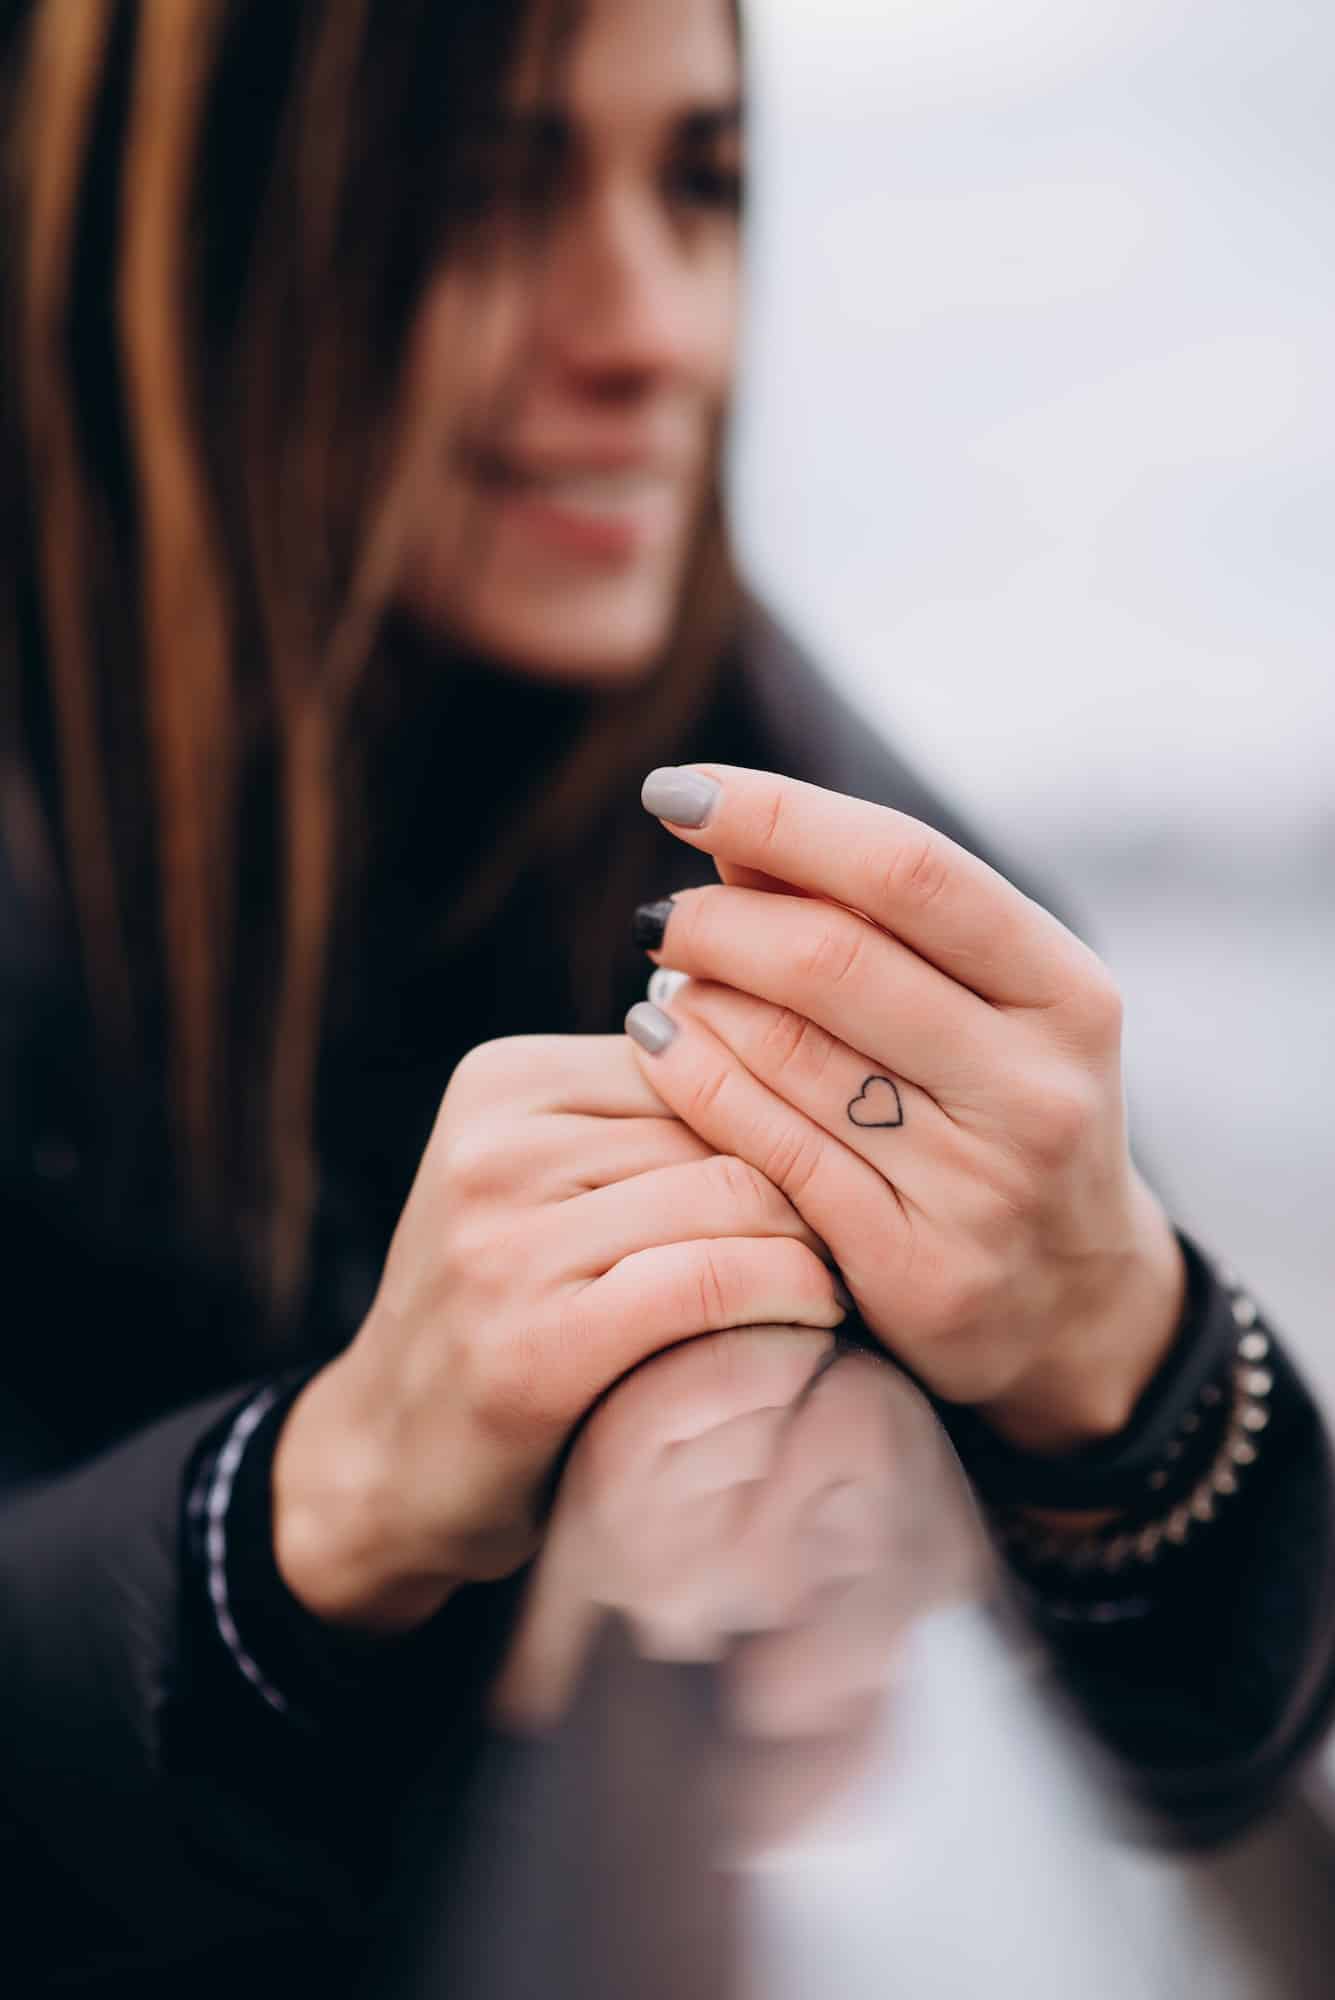 Tattoo in the form of a heart on the girl's finger.